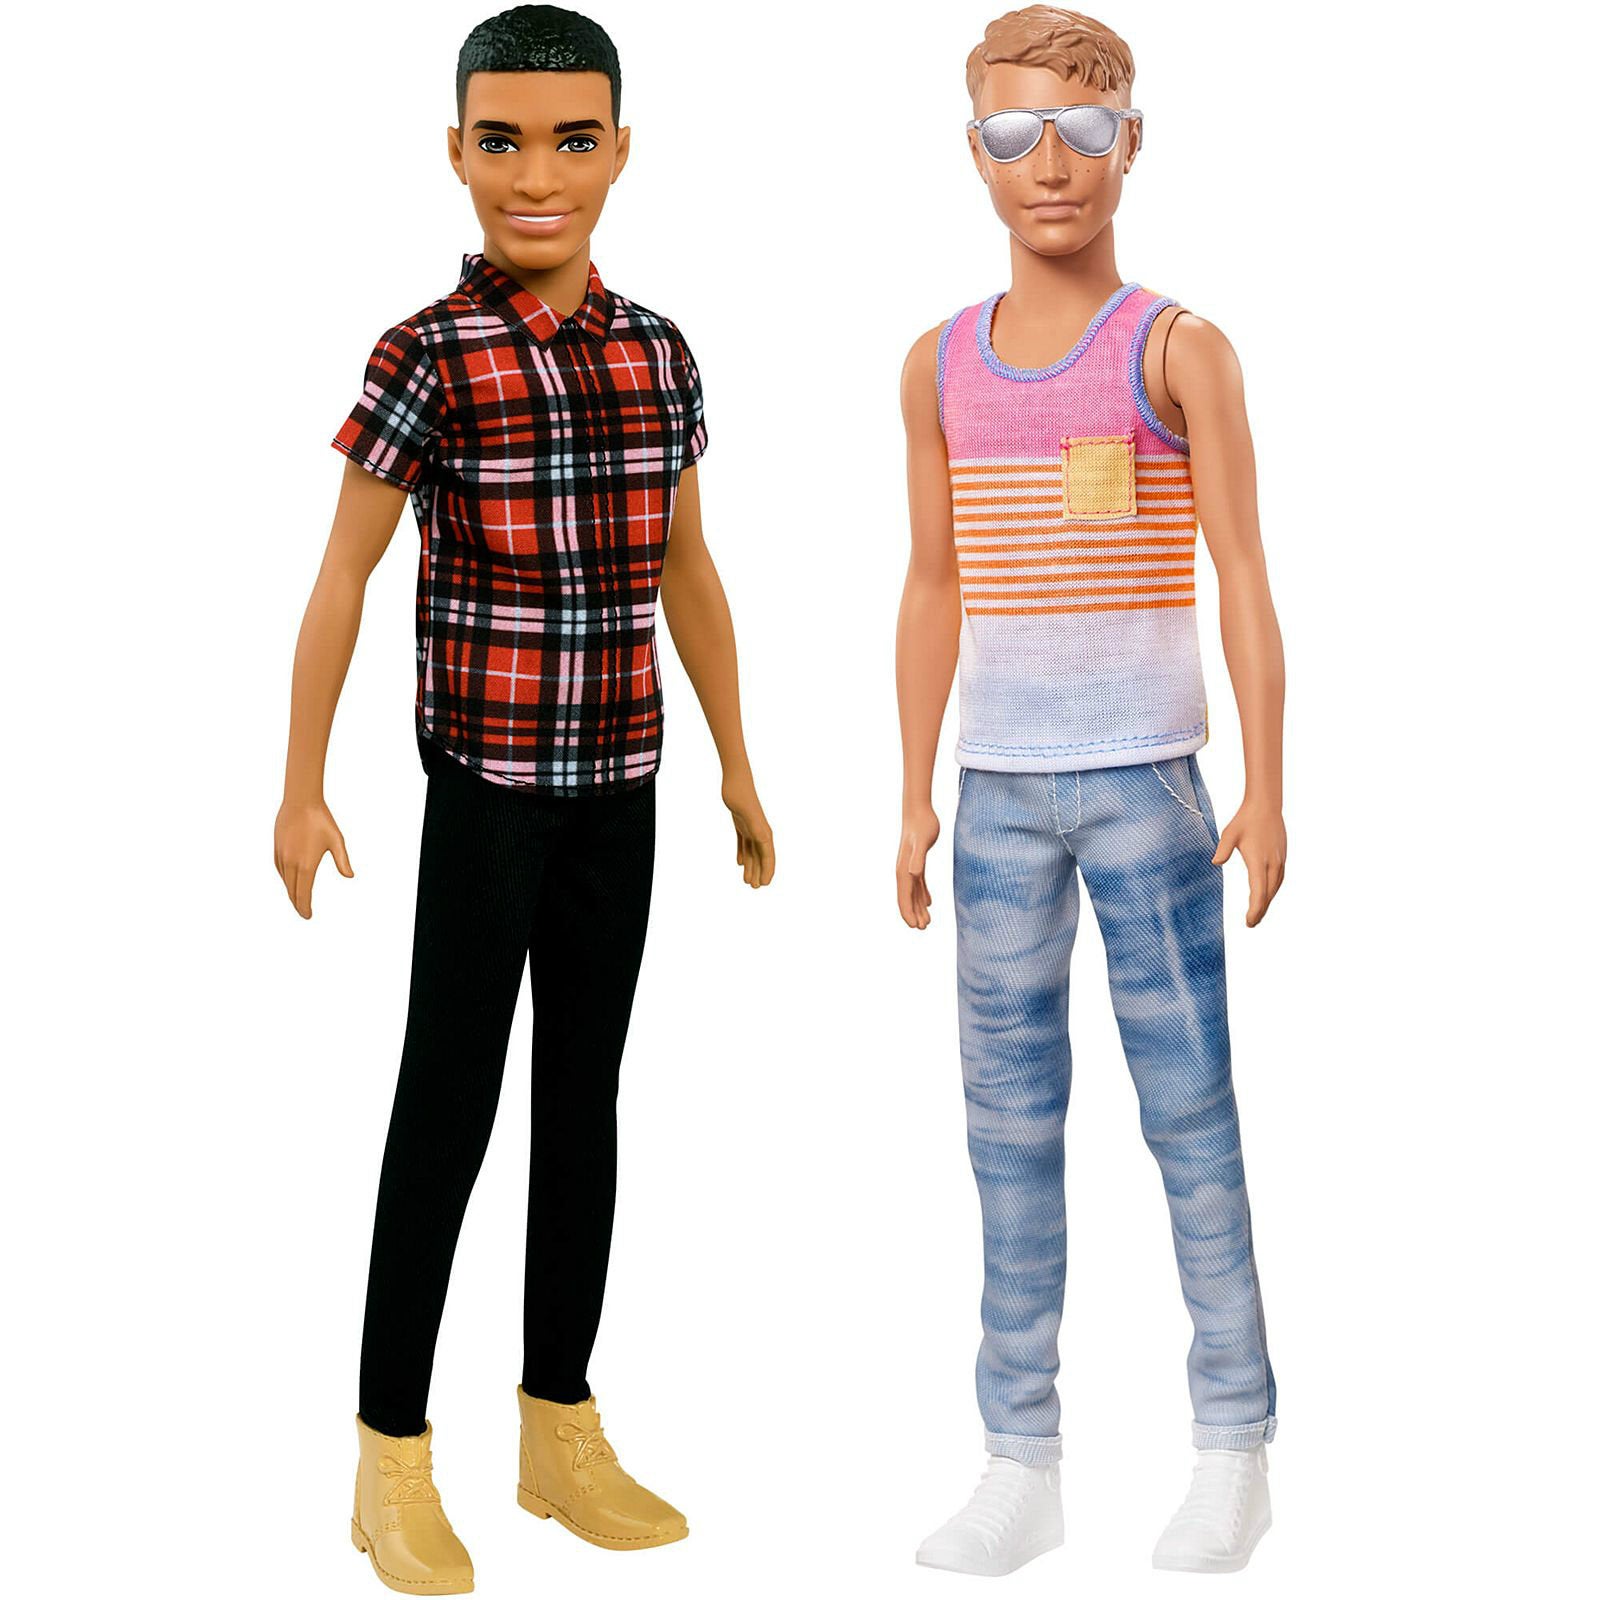 Mattel Introduces a New Line of Diverse Ken Dolls—Cornrows Included
